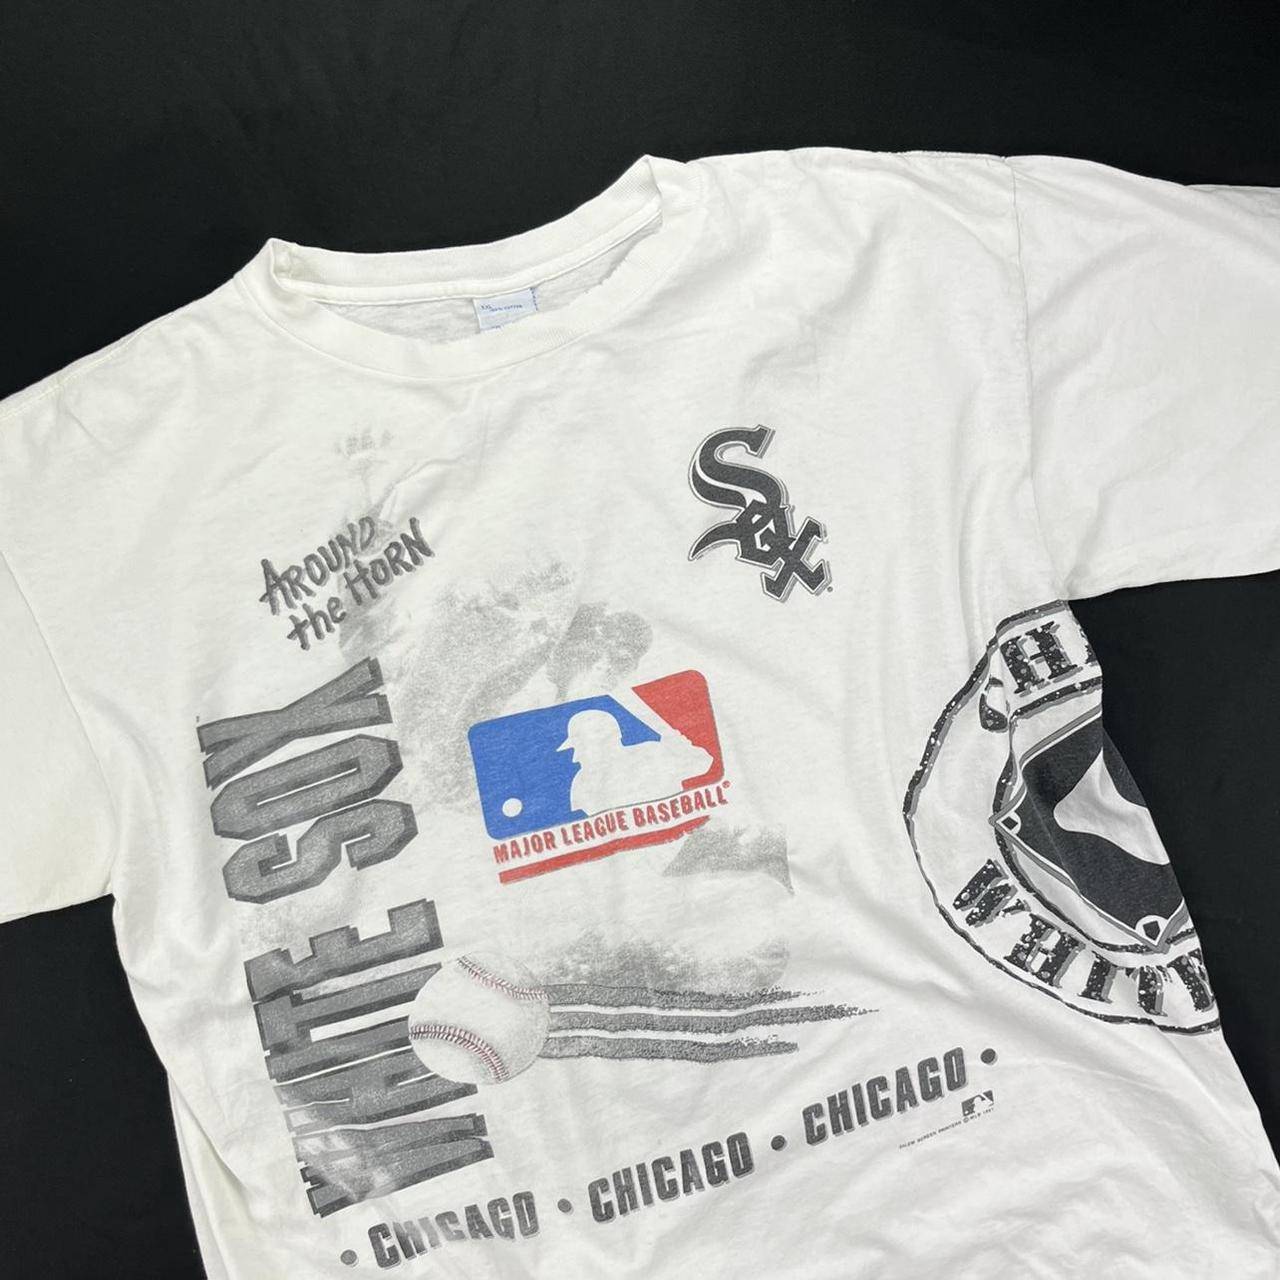 Vintage White Sox Tee Condition Pretty Good Size- - Depop